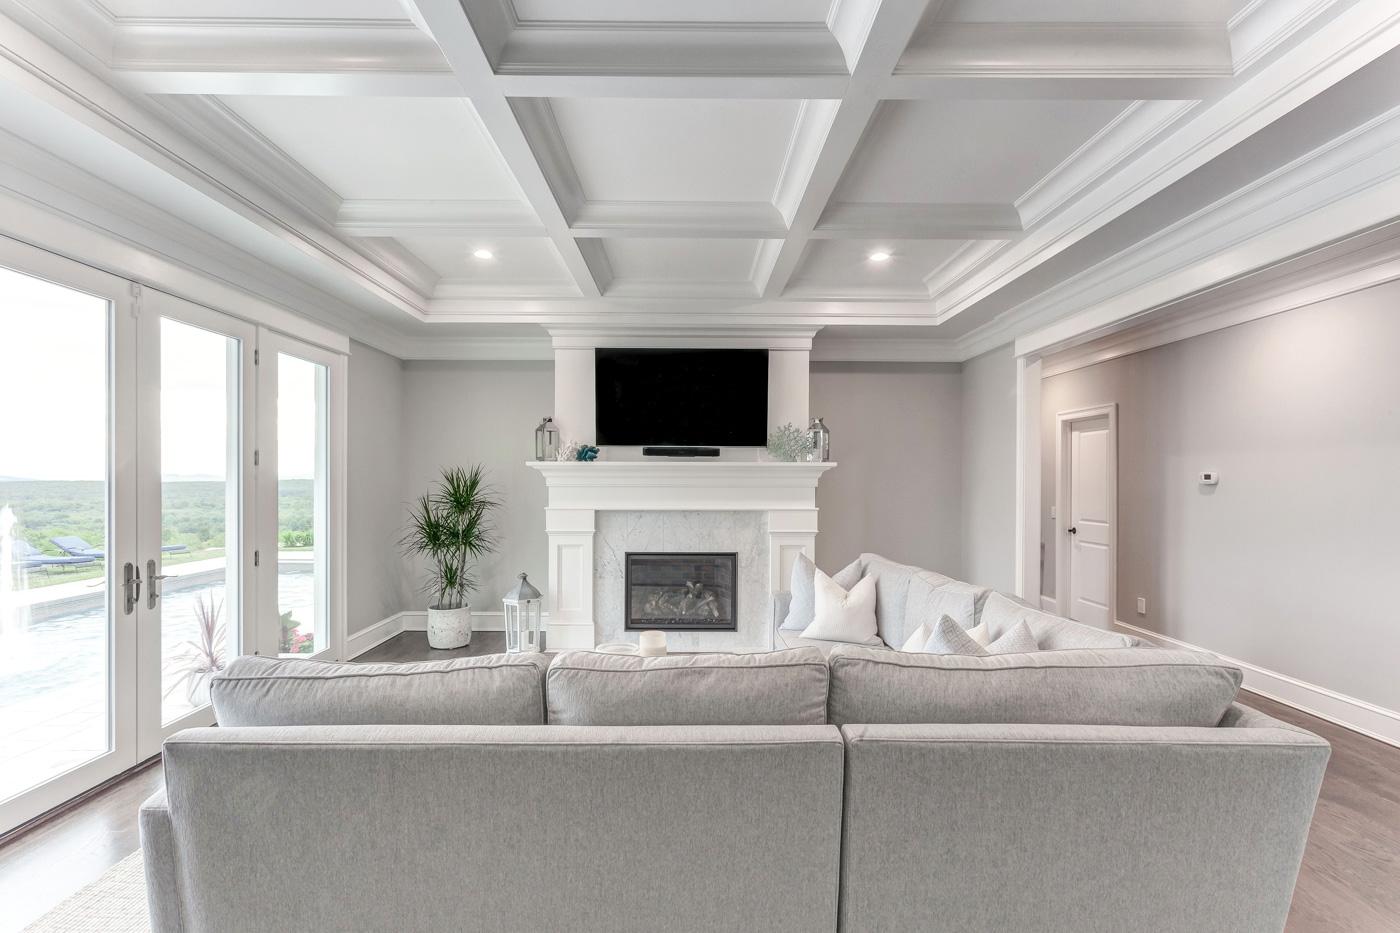 A custom-built mantel and recessed coffered ceiling by Laplante Construction